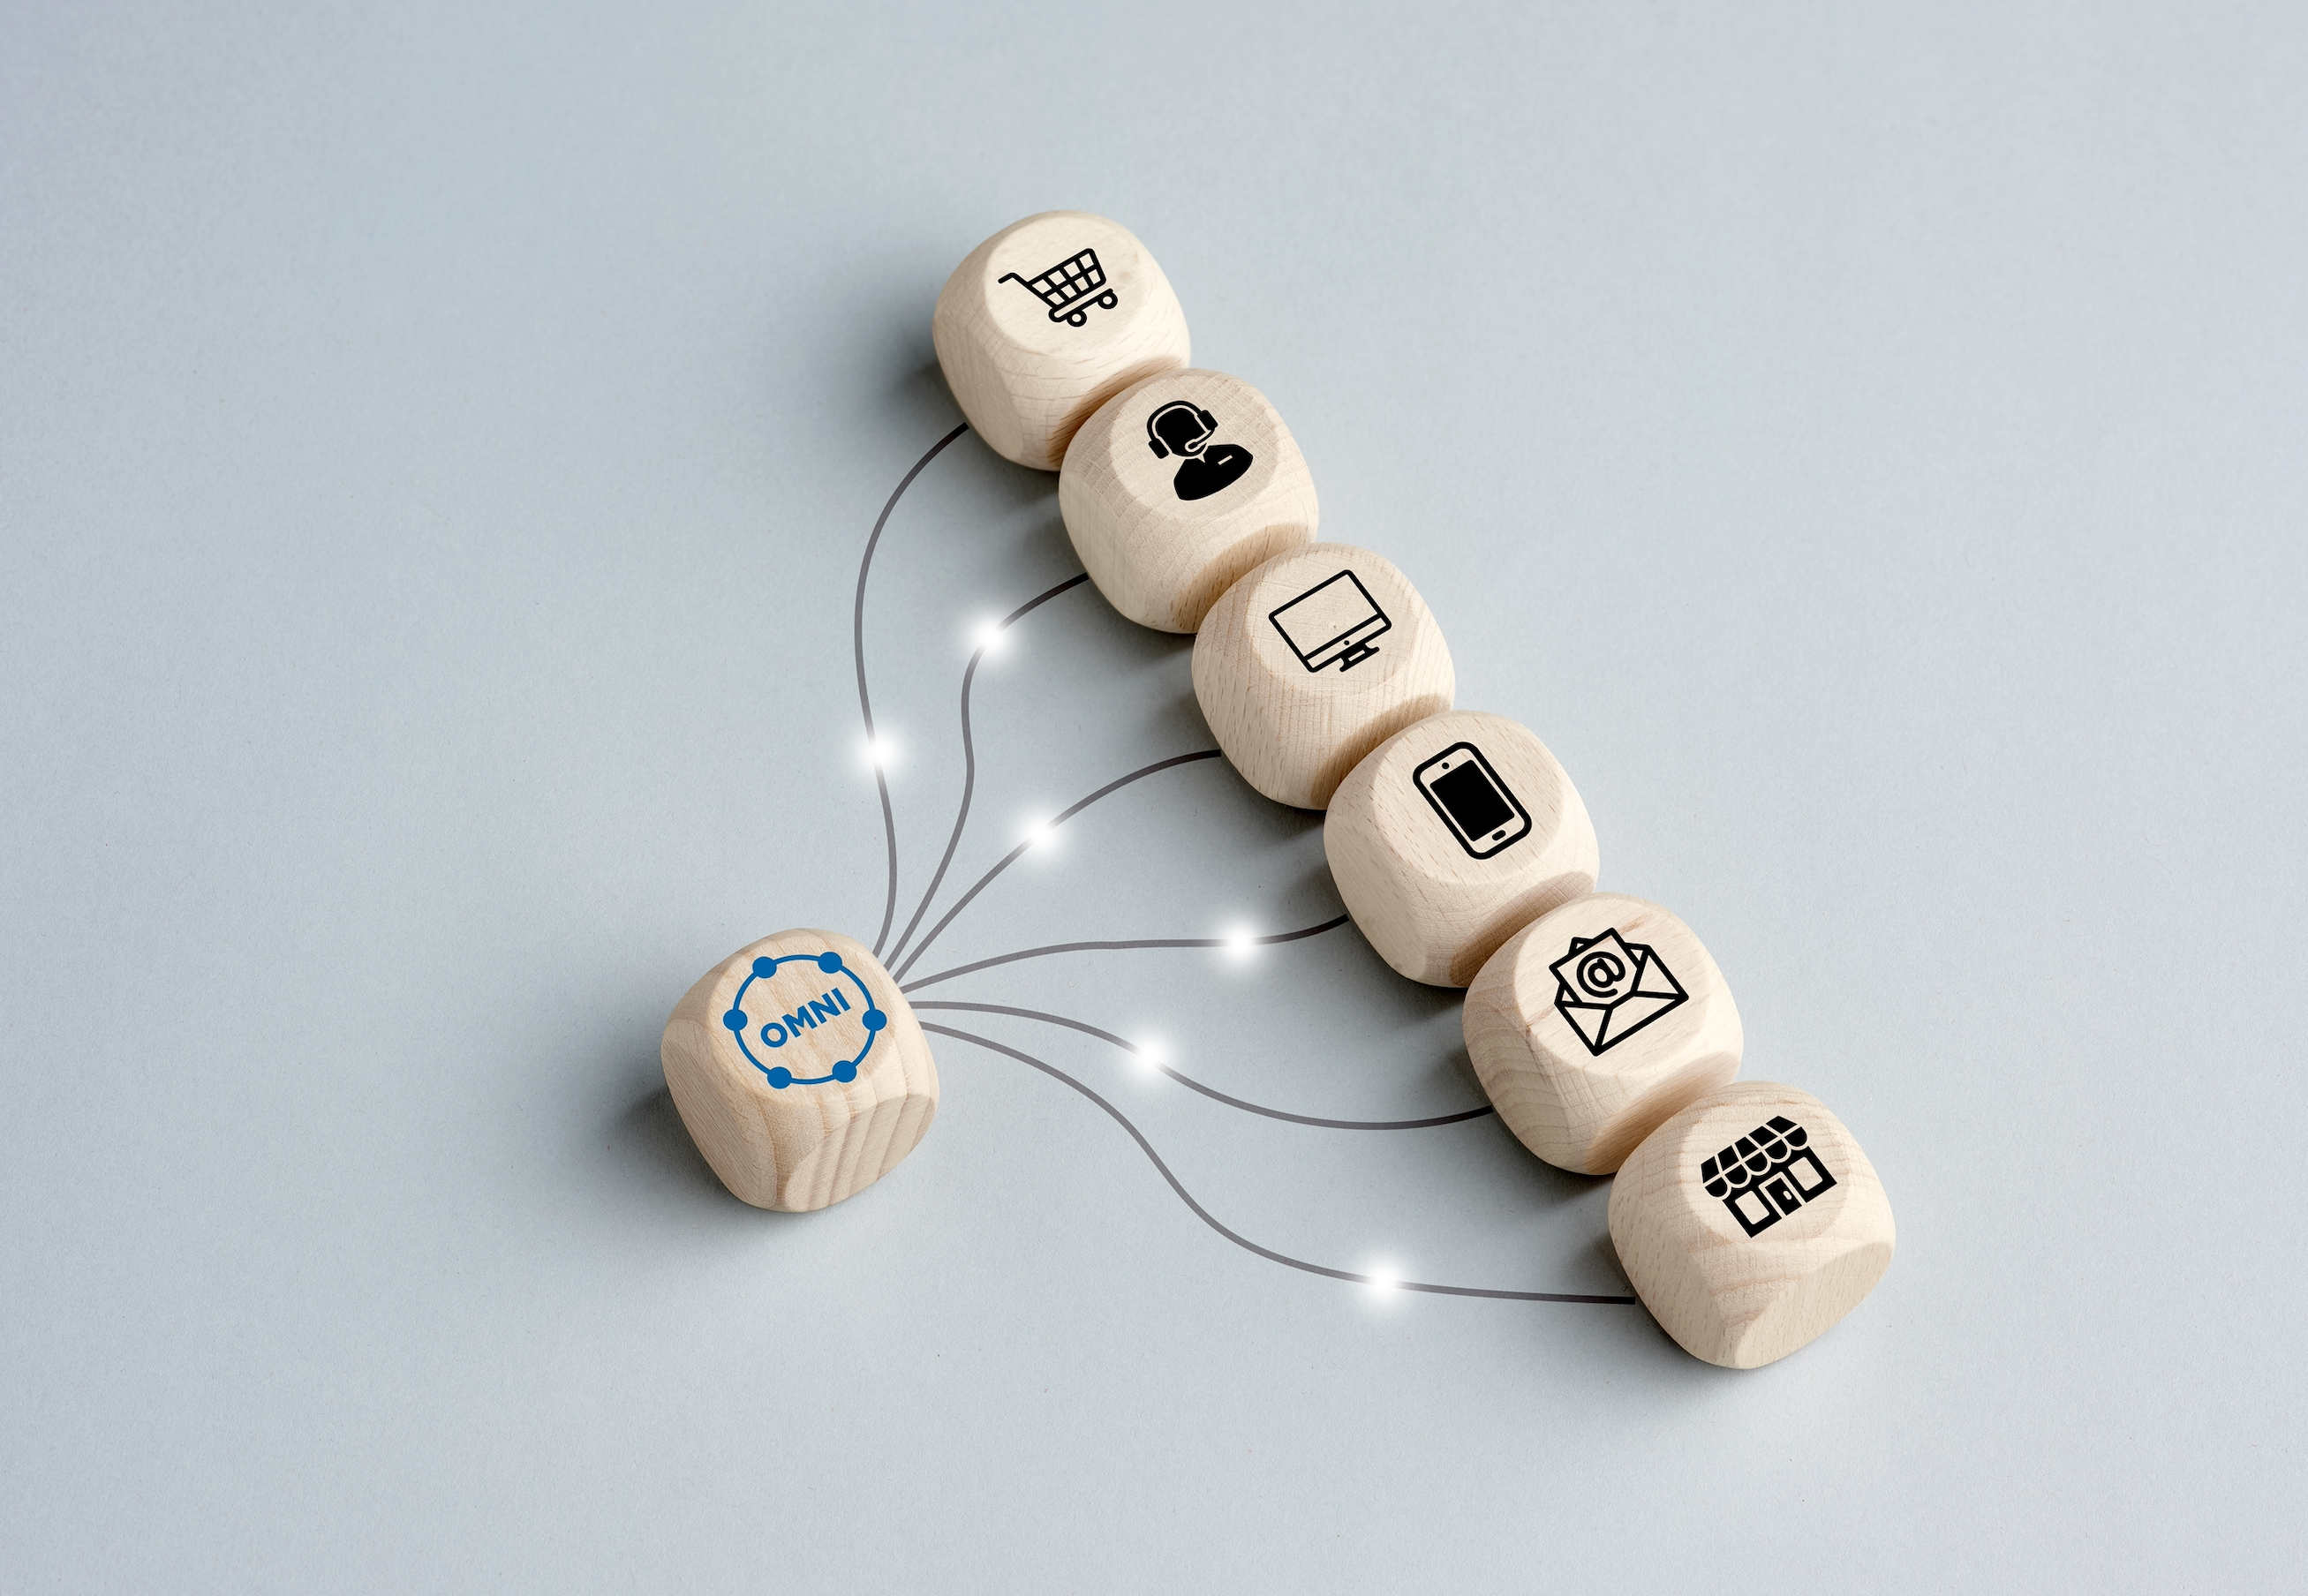 a row of wooden blocks with black marketing icons all connect back to one wooden block with the word omni on it